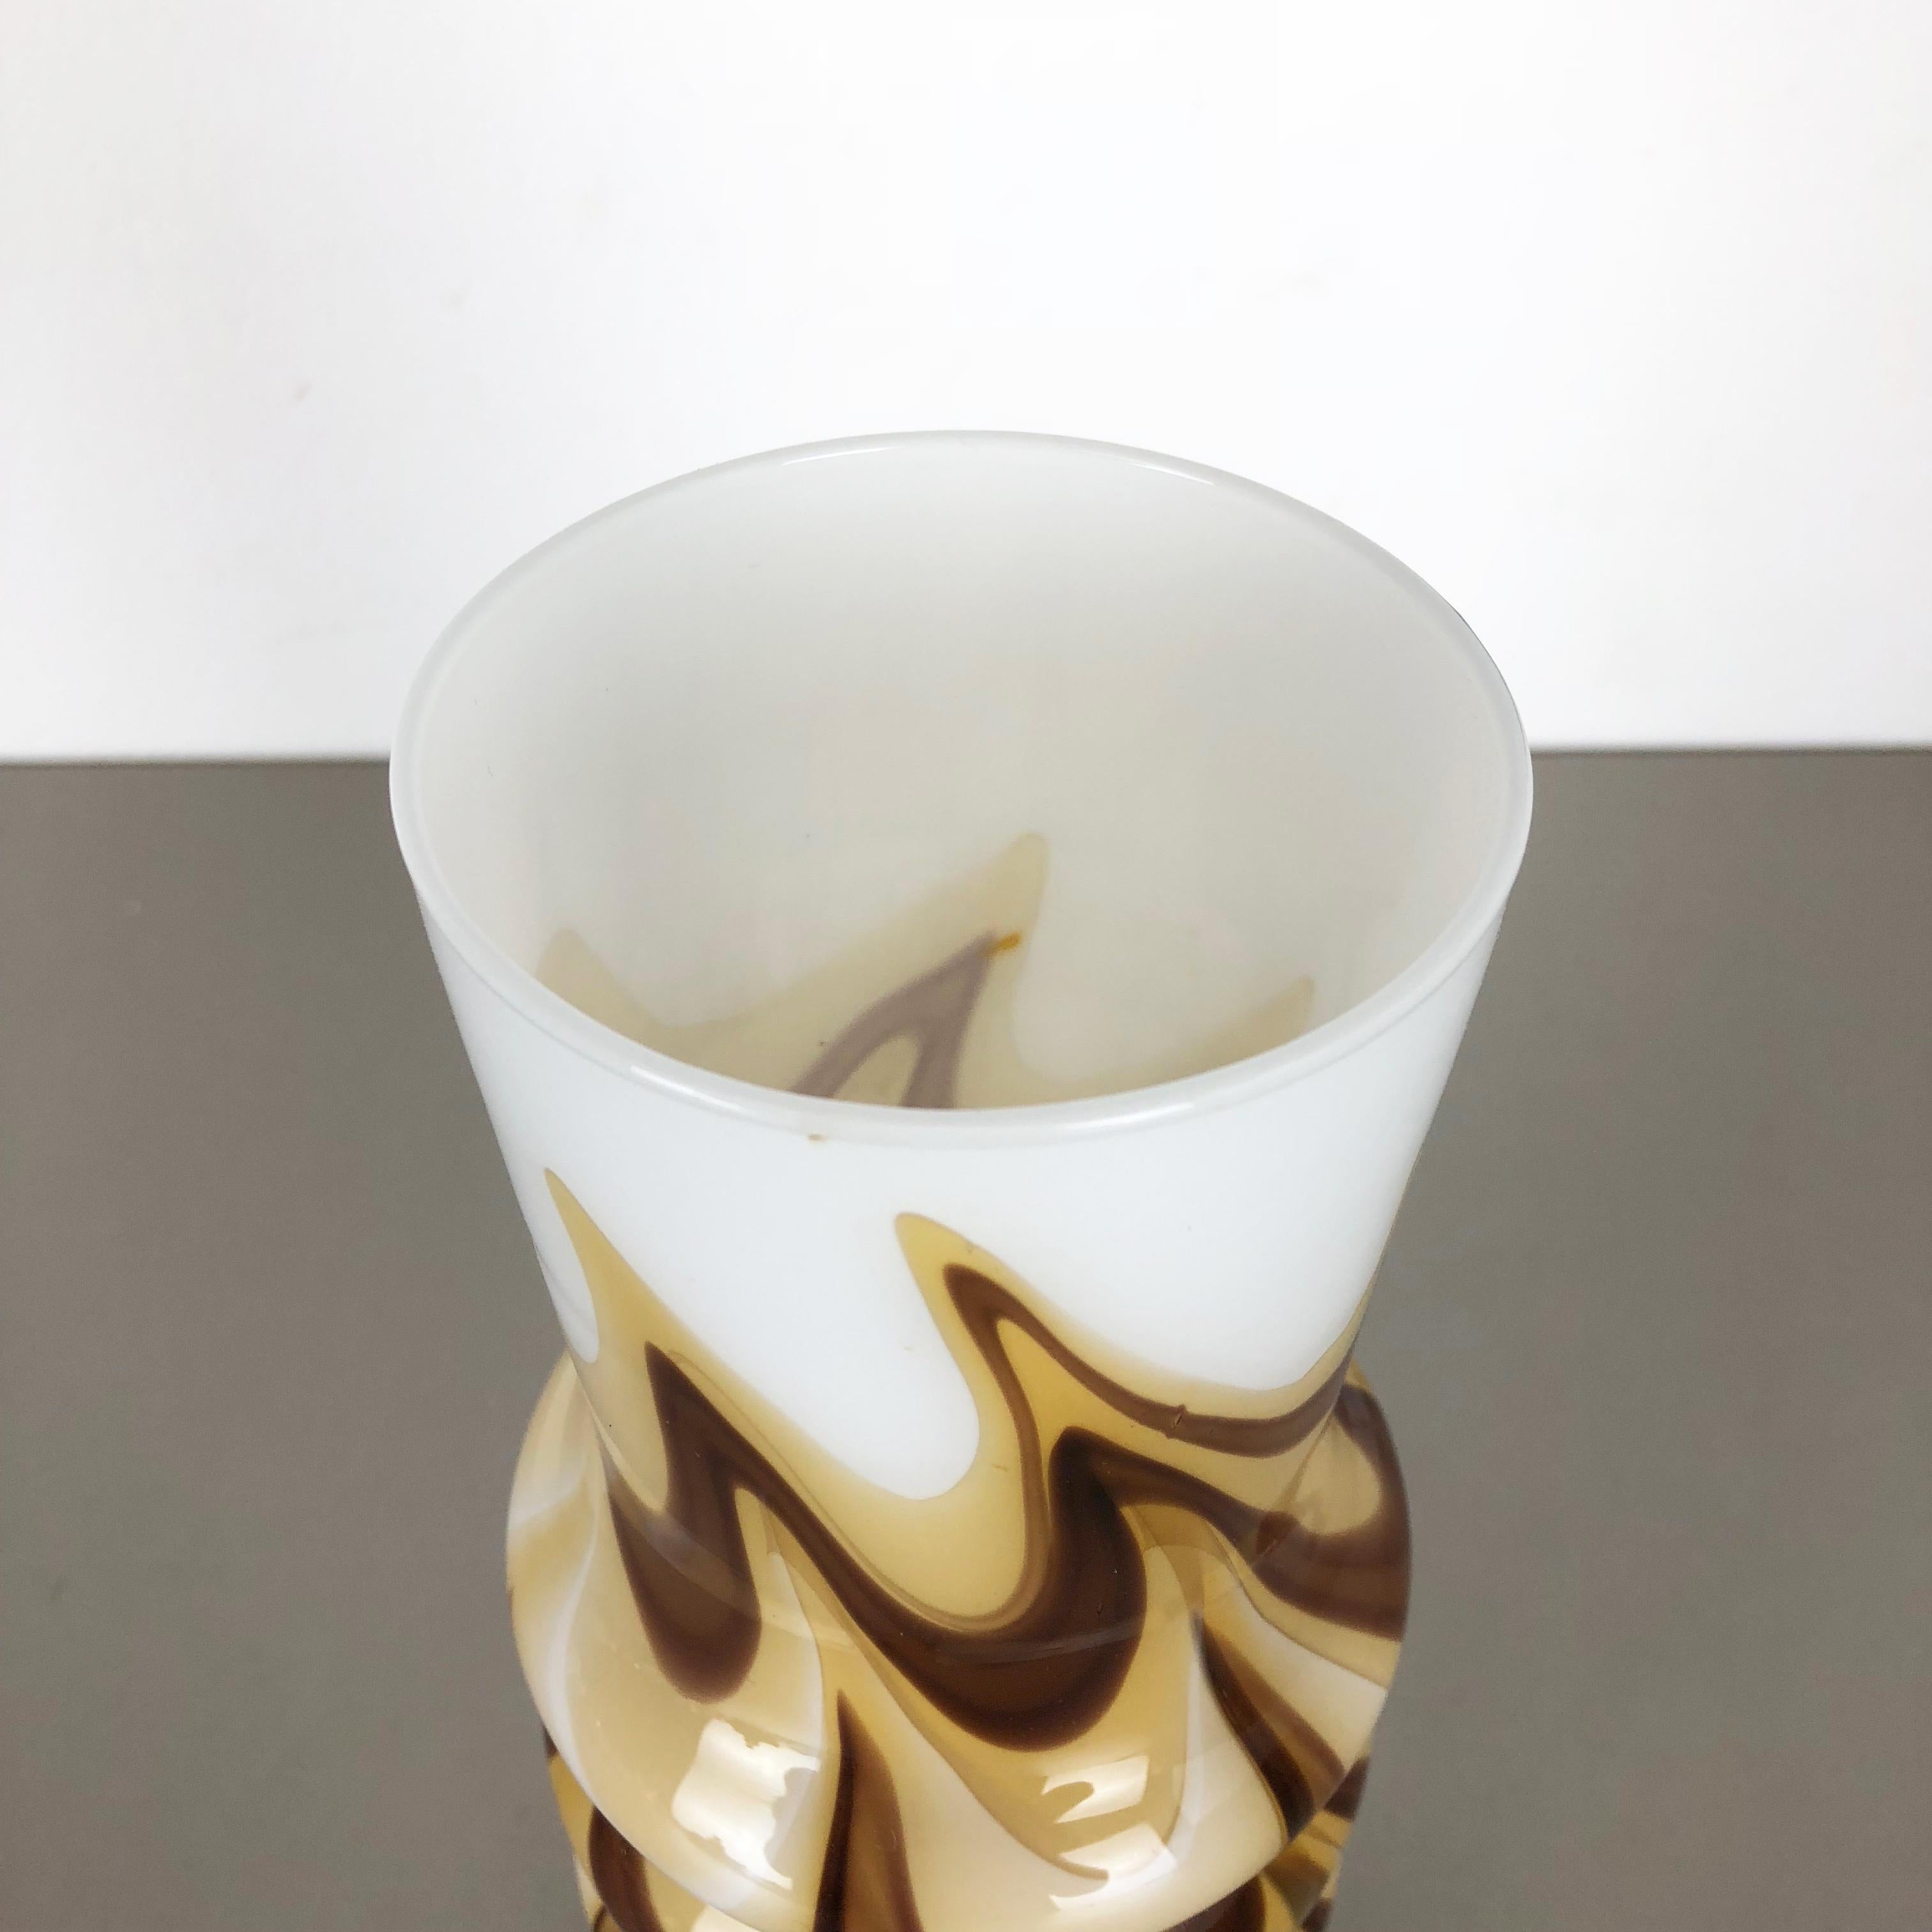 Glass Vintage 1970s Pop Art Opaline Florence Vase Designed by Carlo Moretti, Italy